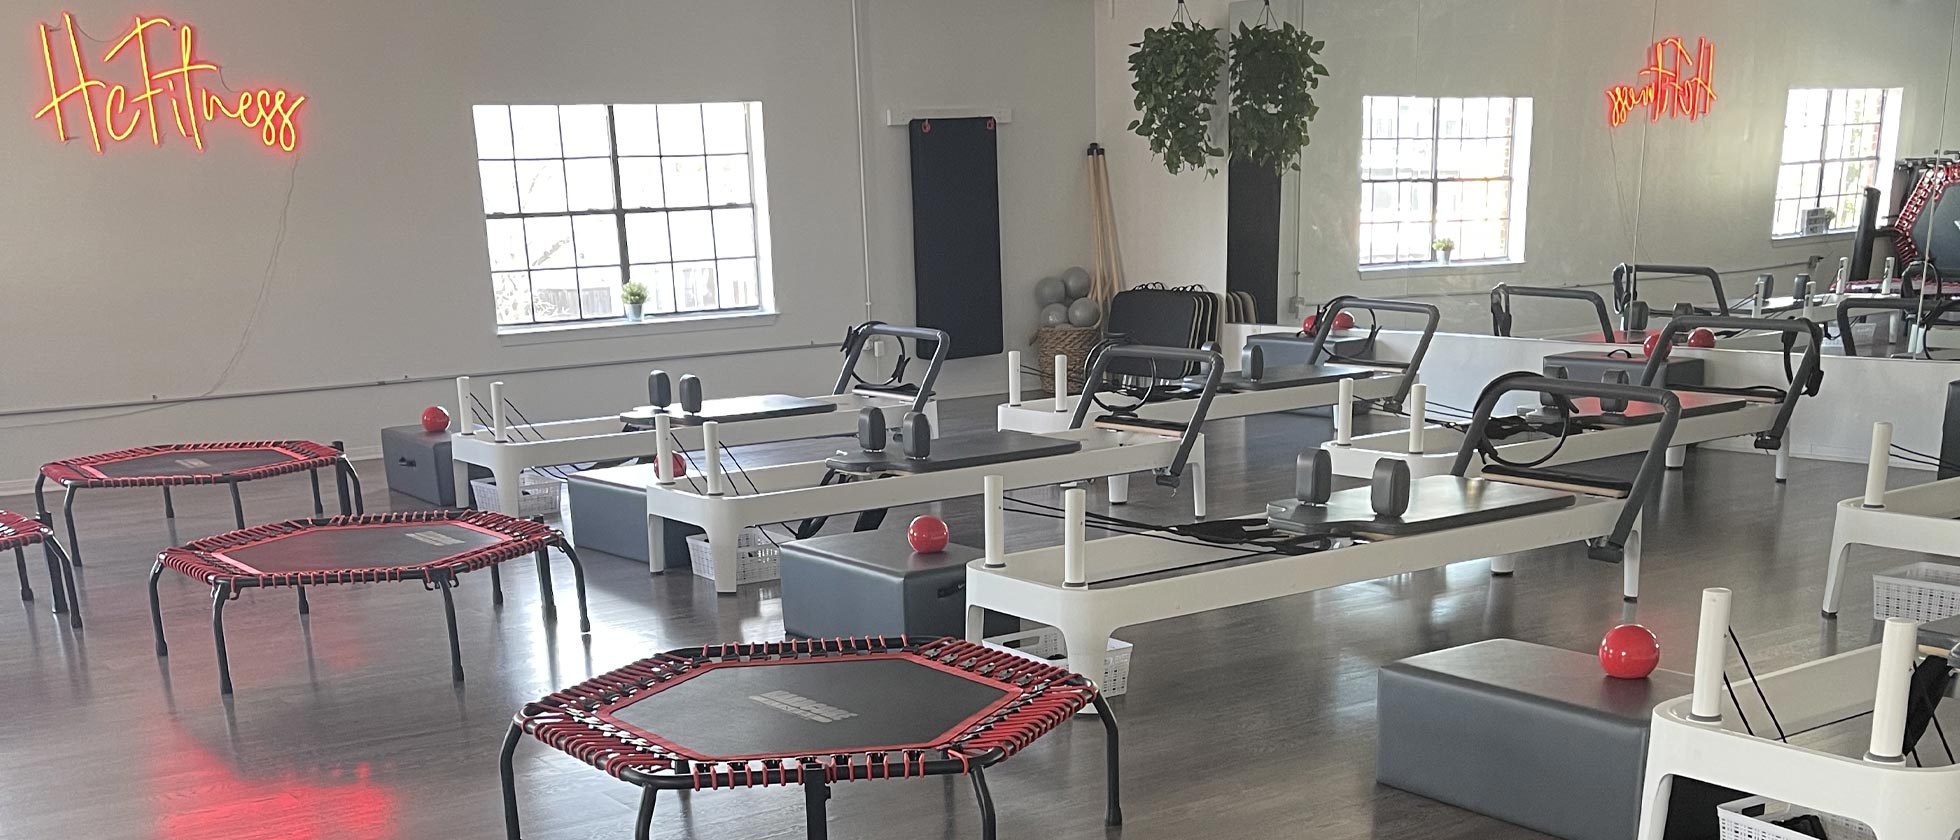 A Pilates Studio Near Rice Village That Can Help You Lose Weight and Get Fit